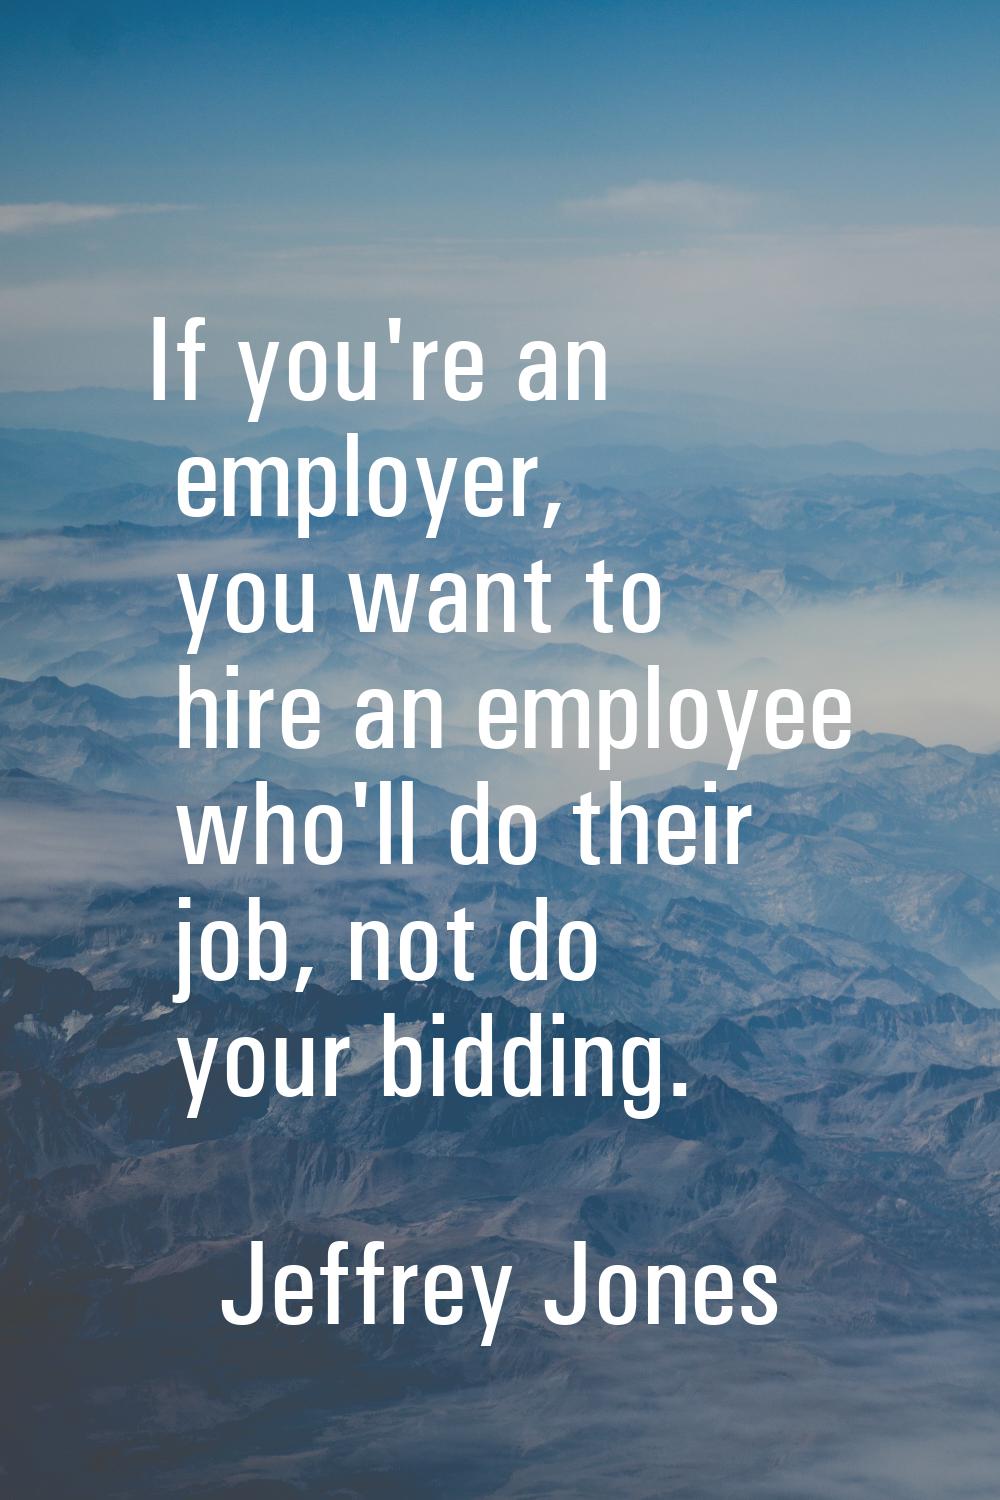 If you're an employer, you want to hire an employee who'll do their job, not do your bidding.